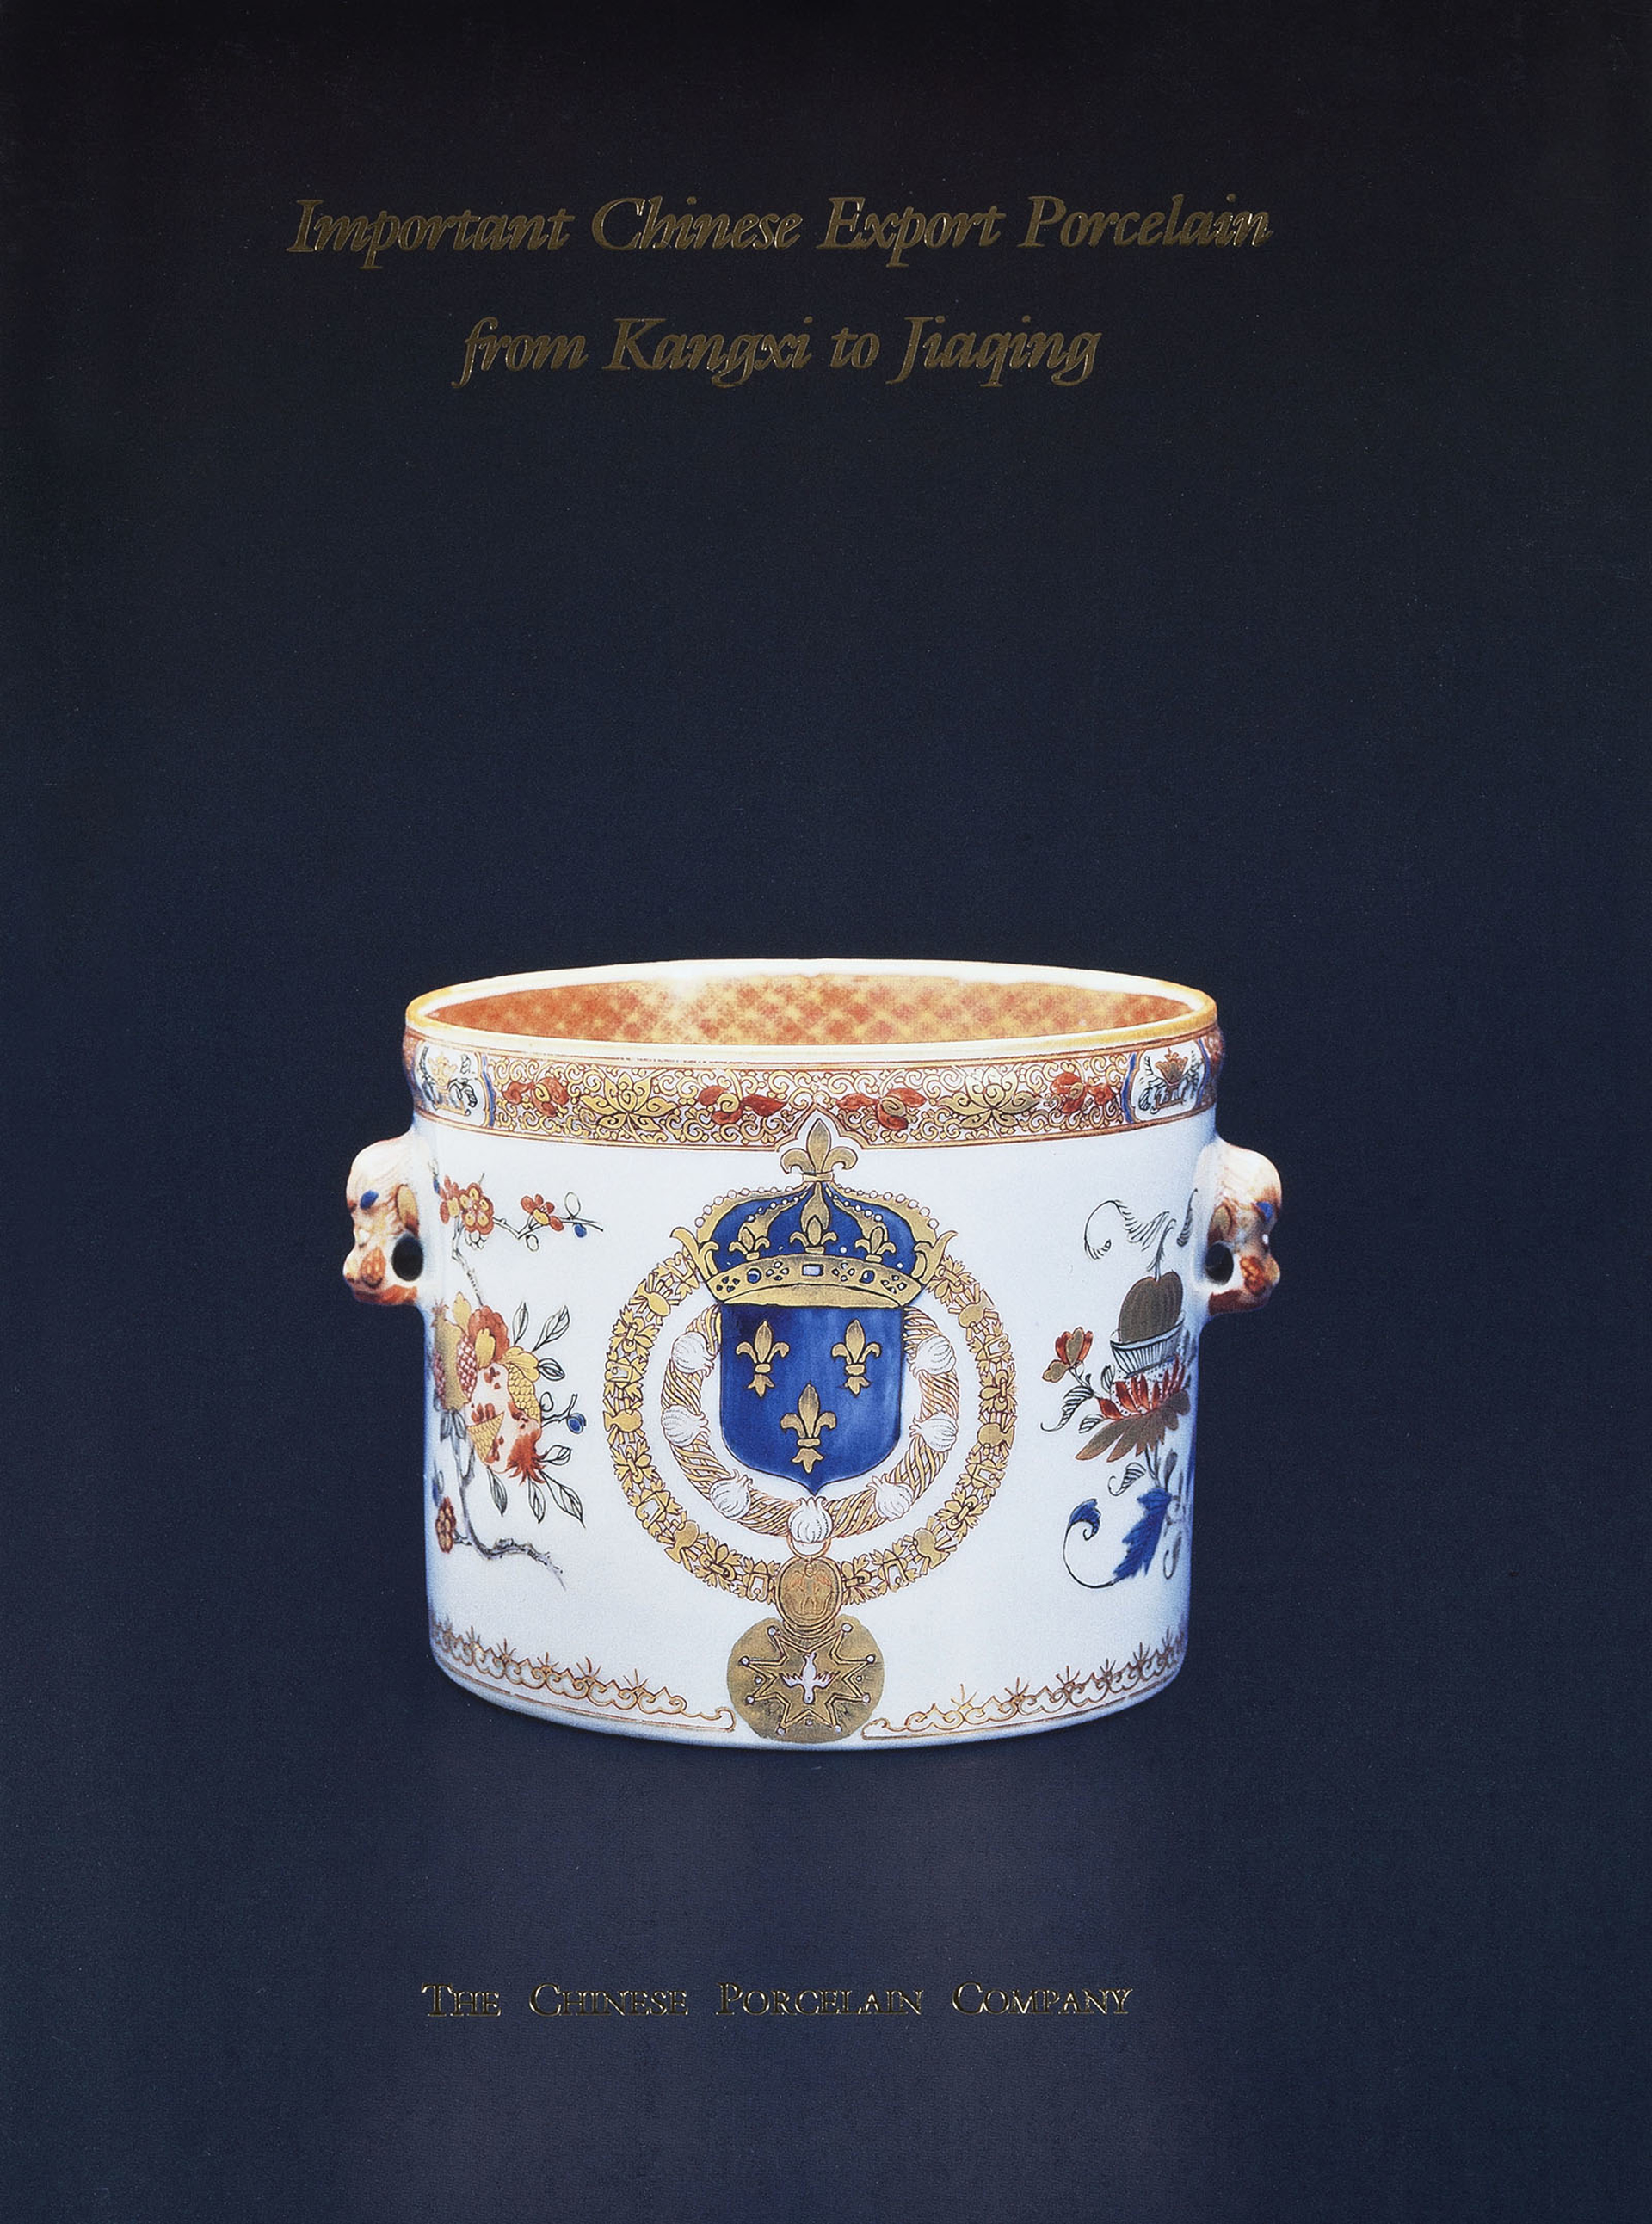 Important Chinese Export Porcelain from Kangxi to Jiaqing by Catalog 26